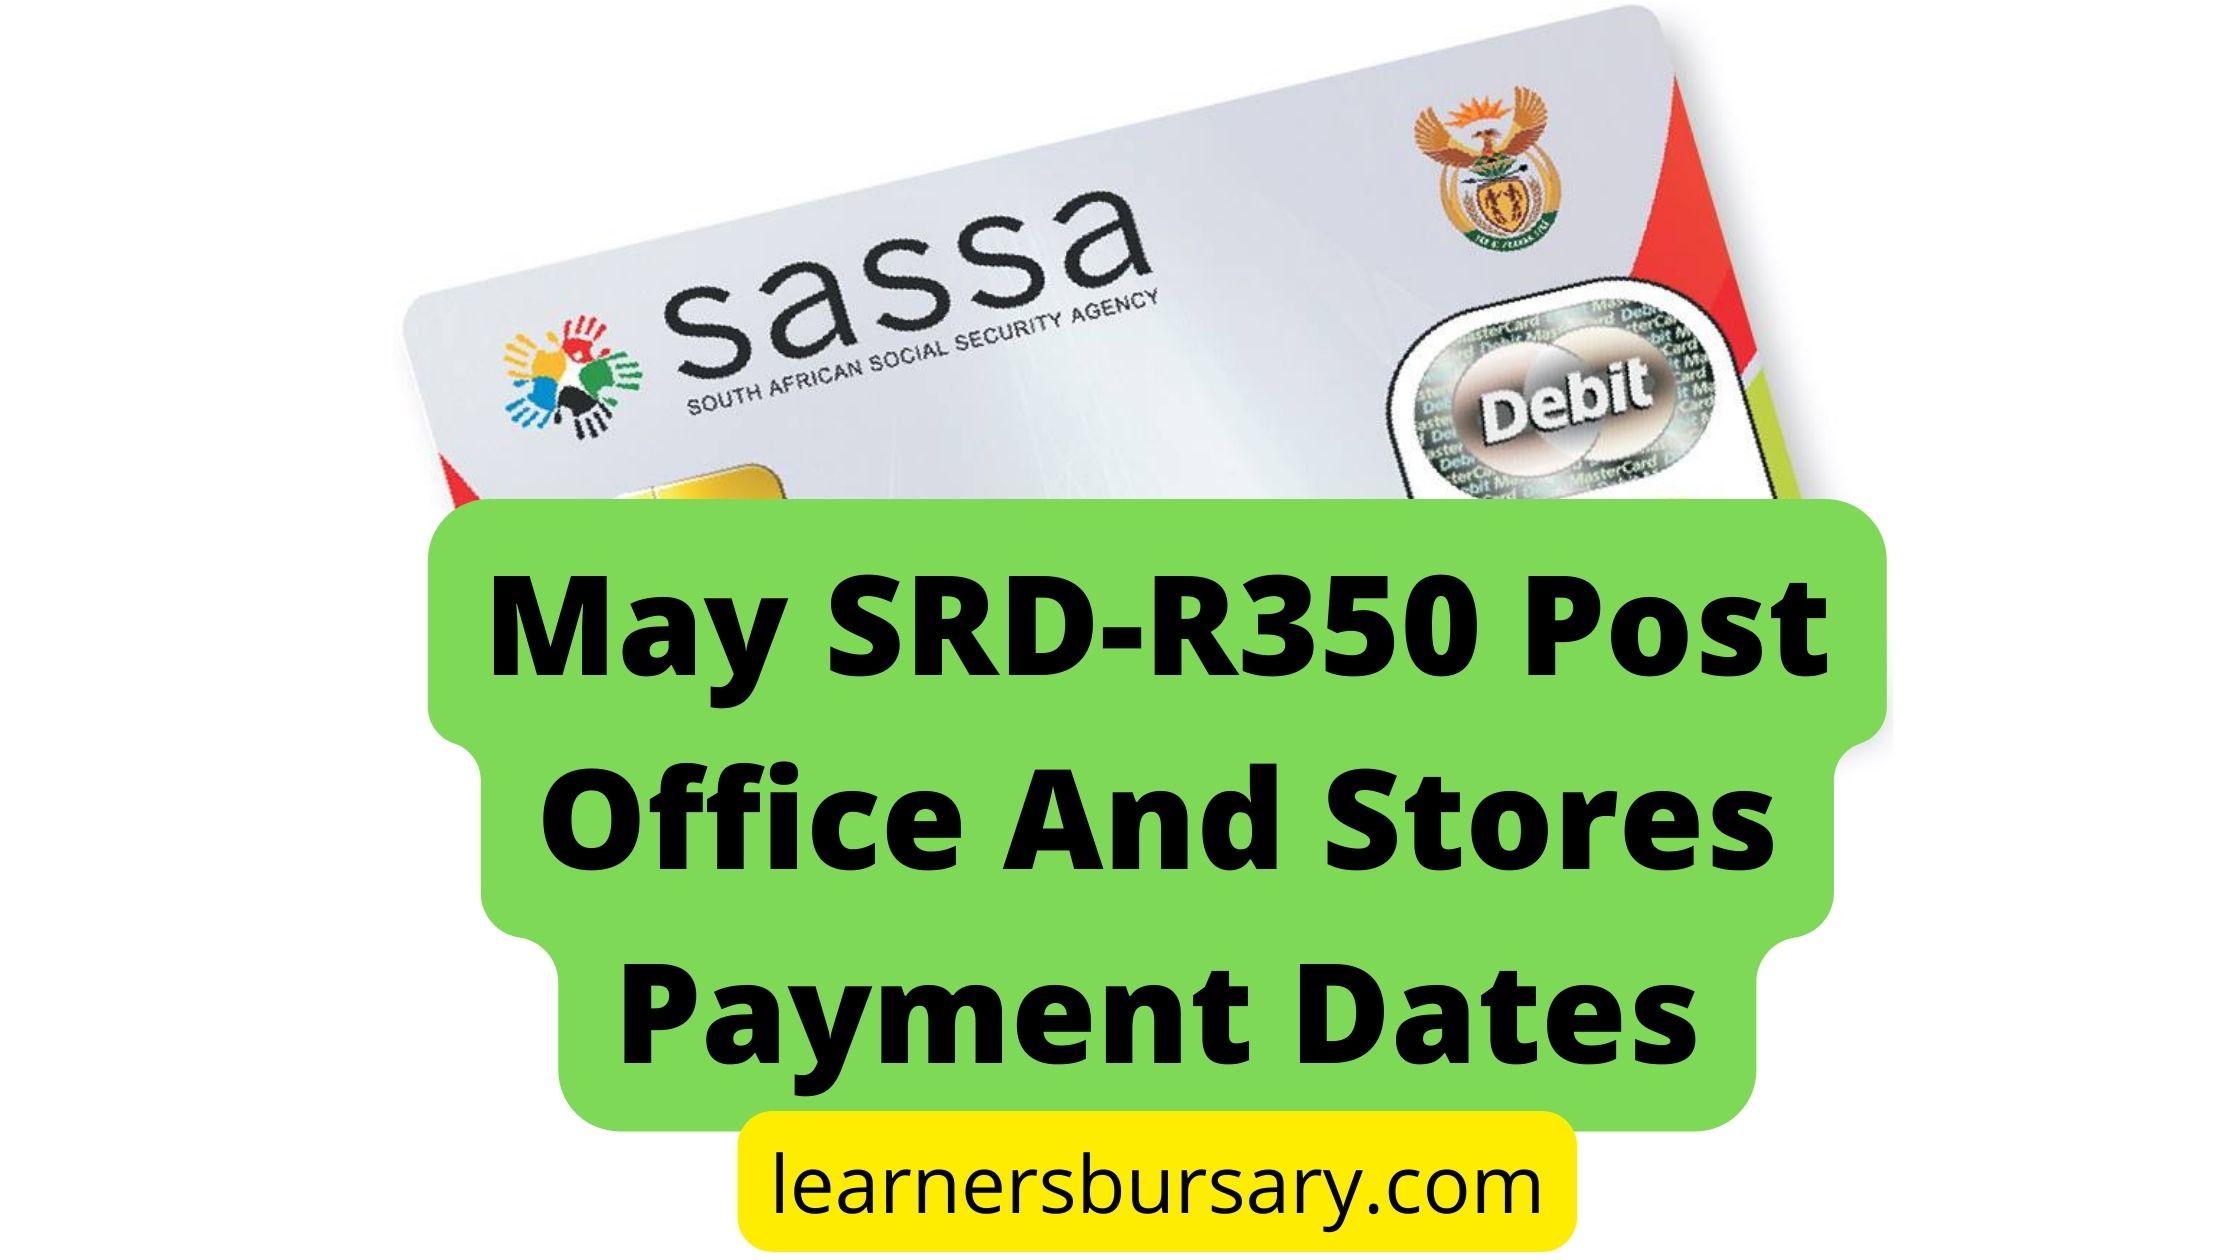 May SRD-R350 Post Office And Stores Payment Dates